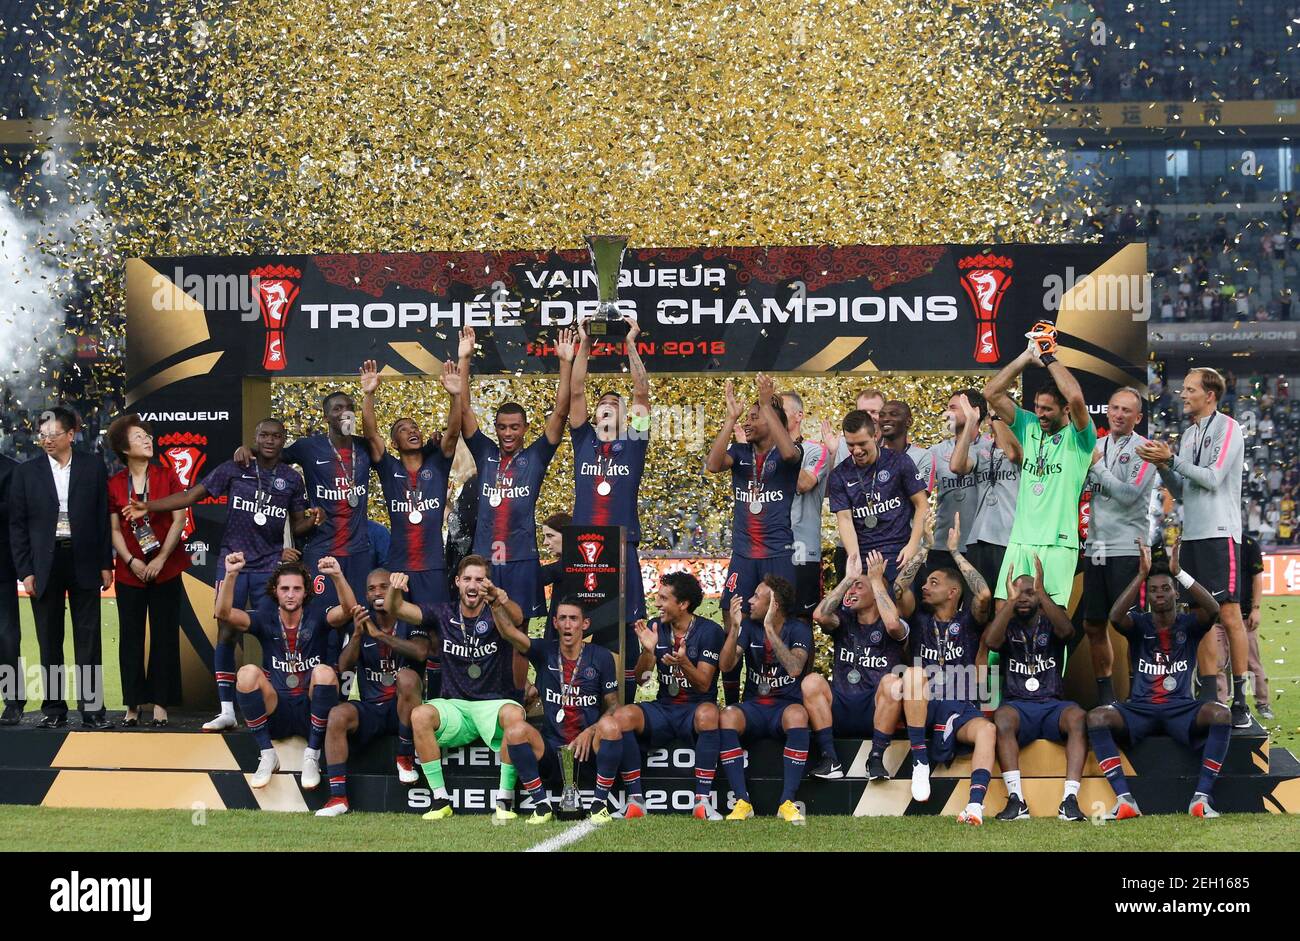 Soccer Football - French Super Cup Trophee des Champions - Paris St Germain v AS Monaco - Shenzhen Universiade Sports Centre, Shenzhen, China - August 4, 2018   Paris St Germain celebrate with the trophy after winning the French Super Cup   REUTERS/Bobby Yip Stock Photo